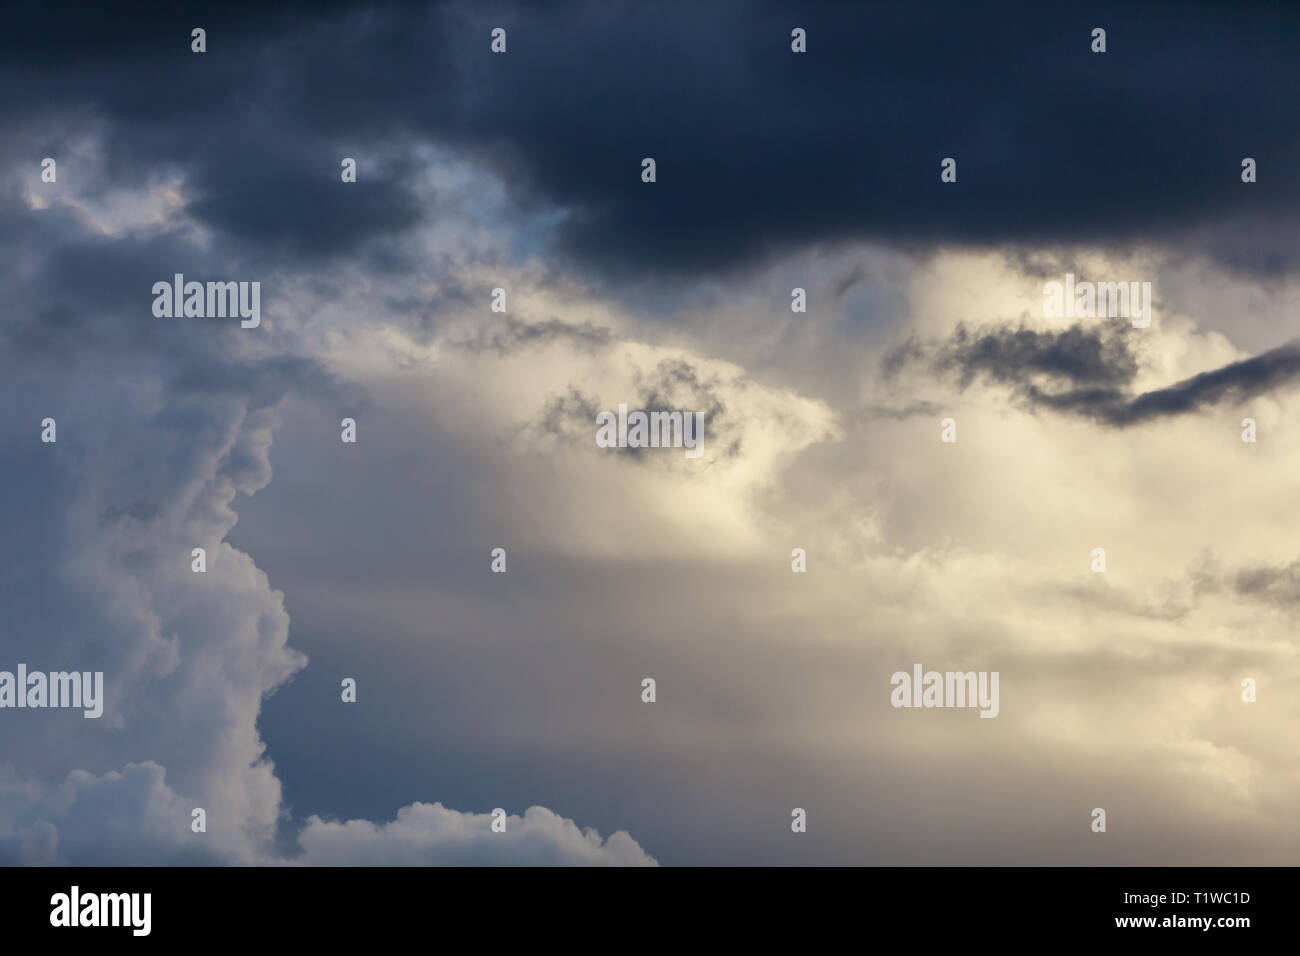 Beautiful image of cloud mix in Oklahoma with white clouds through darker blue clouds. Stock Photo